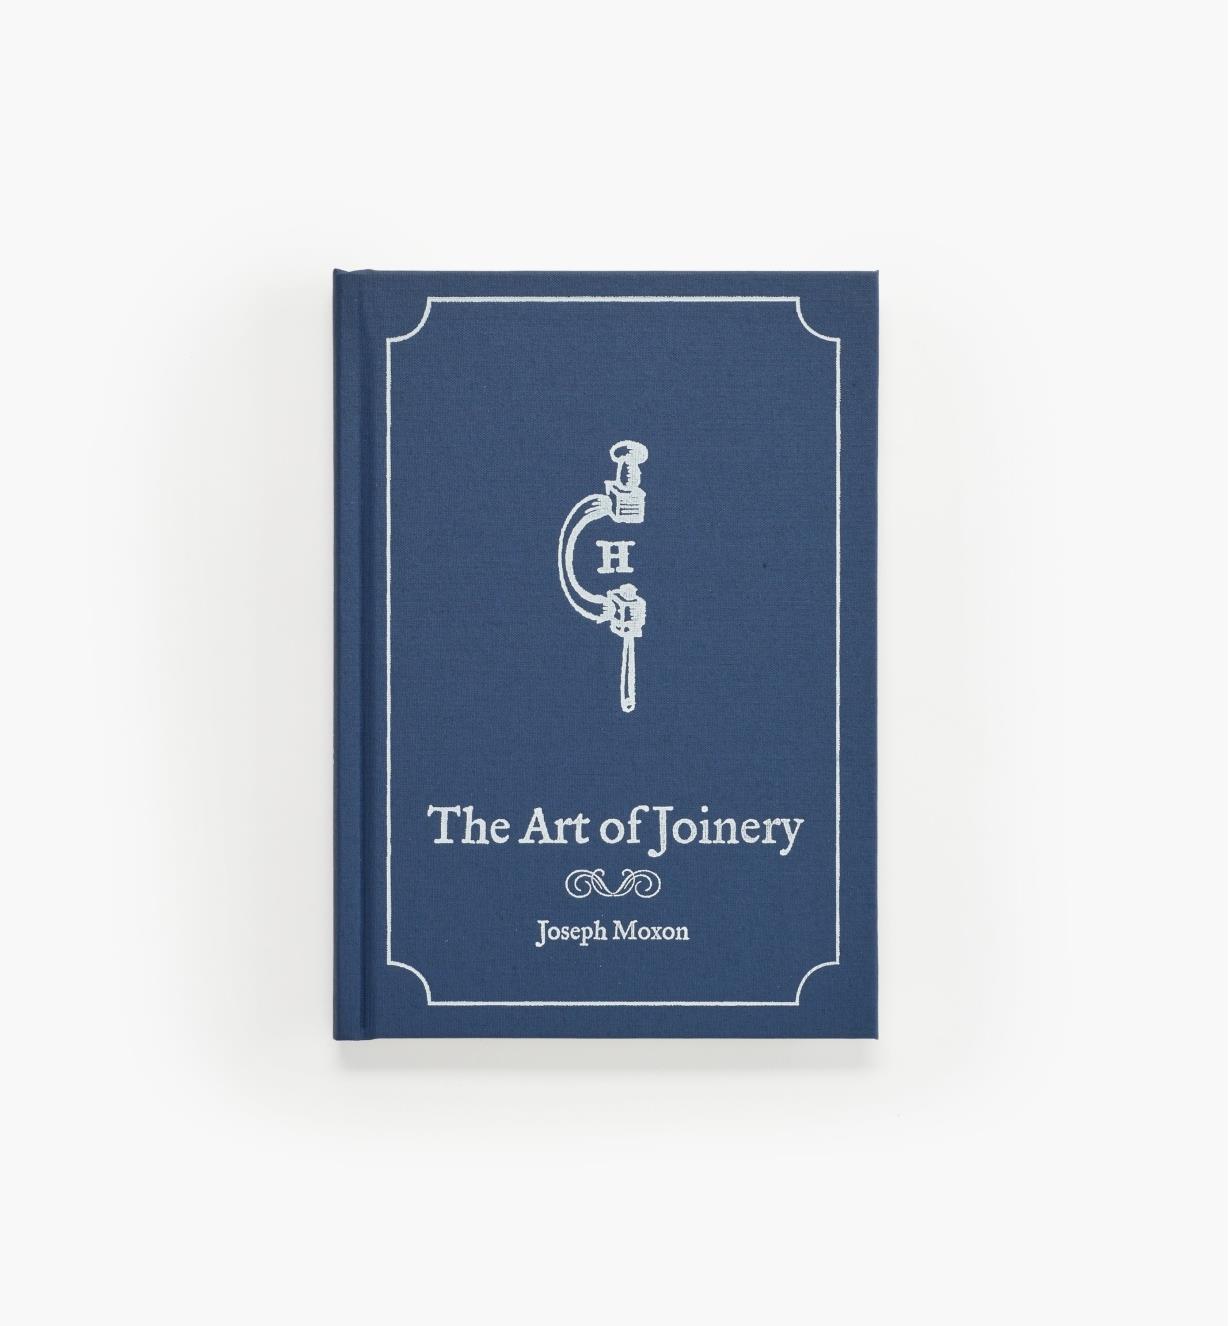 20L0289 - The Art of Joinery, Revised Edition